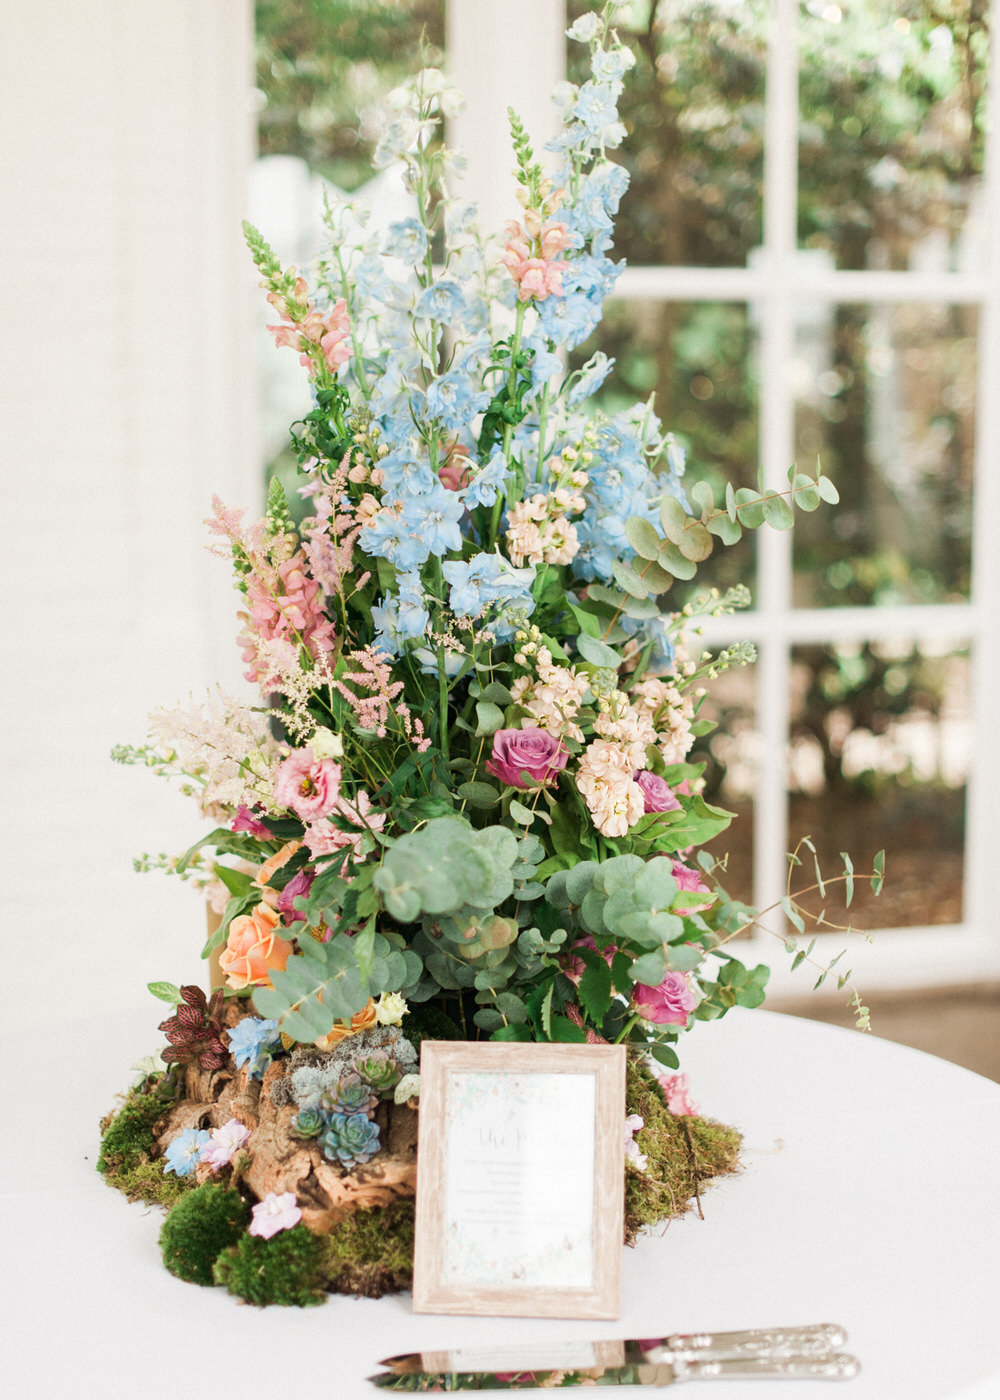 Floral centrepiece | Midsummer Themed Florals | A Midsummer nights dream inspired children's birthday party with stunning floral, fairy entertainment, crafts and a picnic. Photos by Kate Nielen.